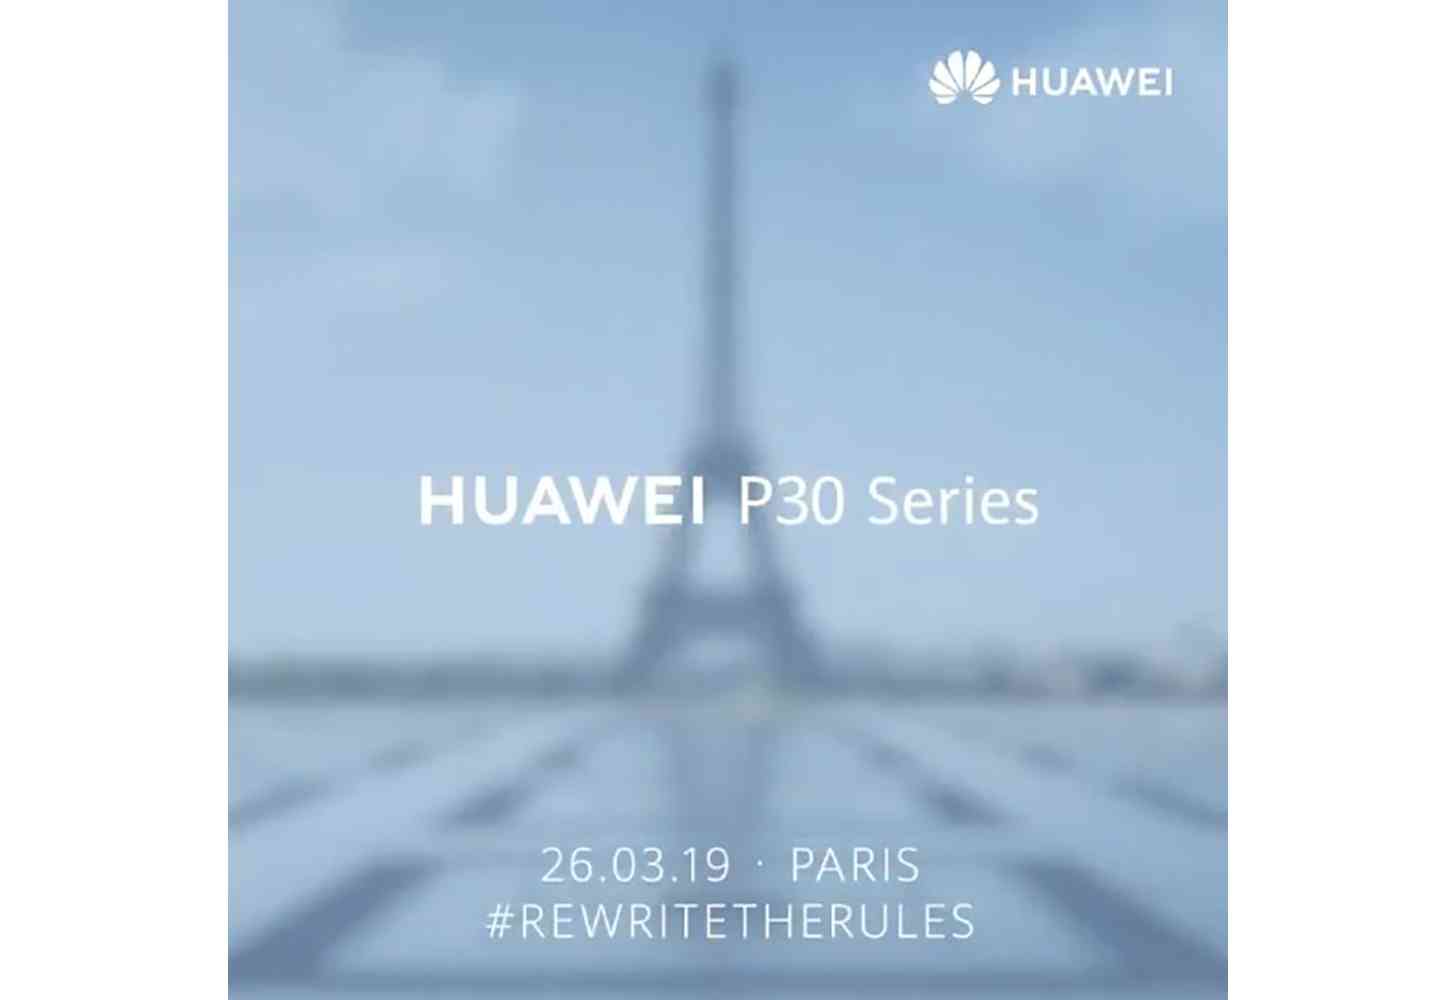 Huawei P30 event